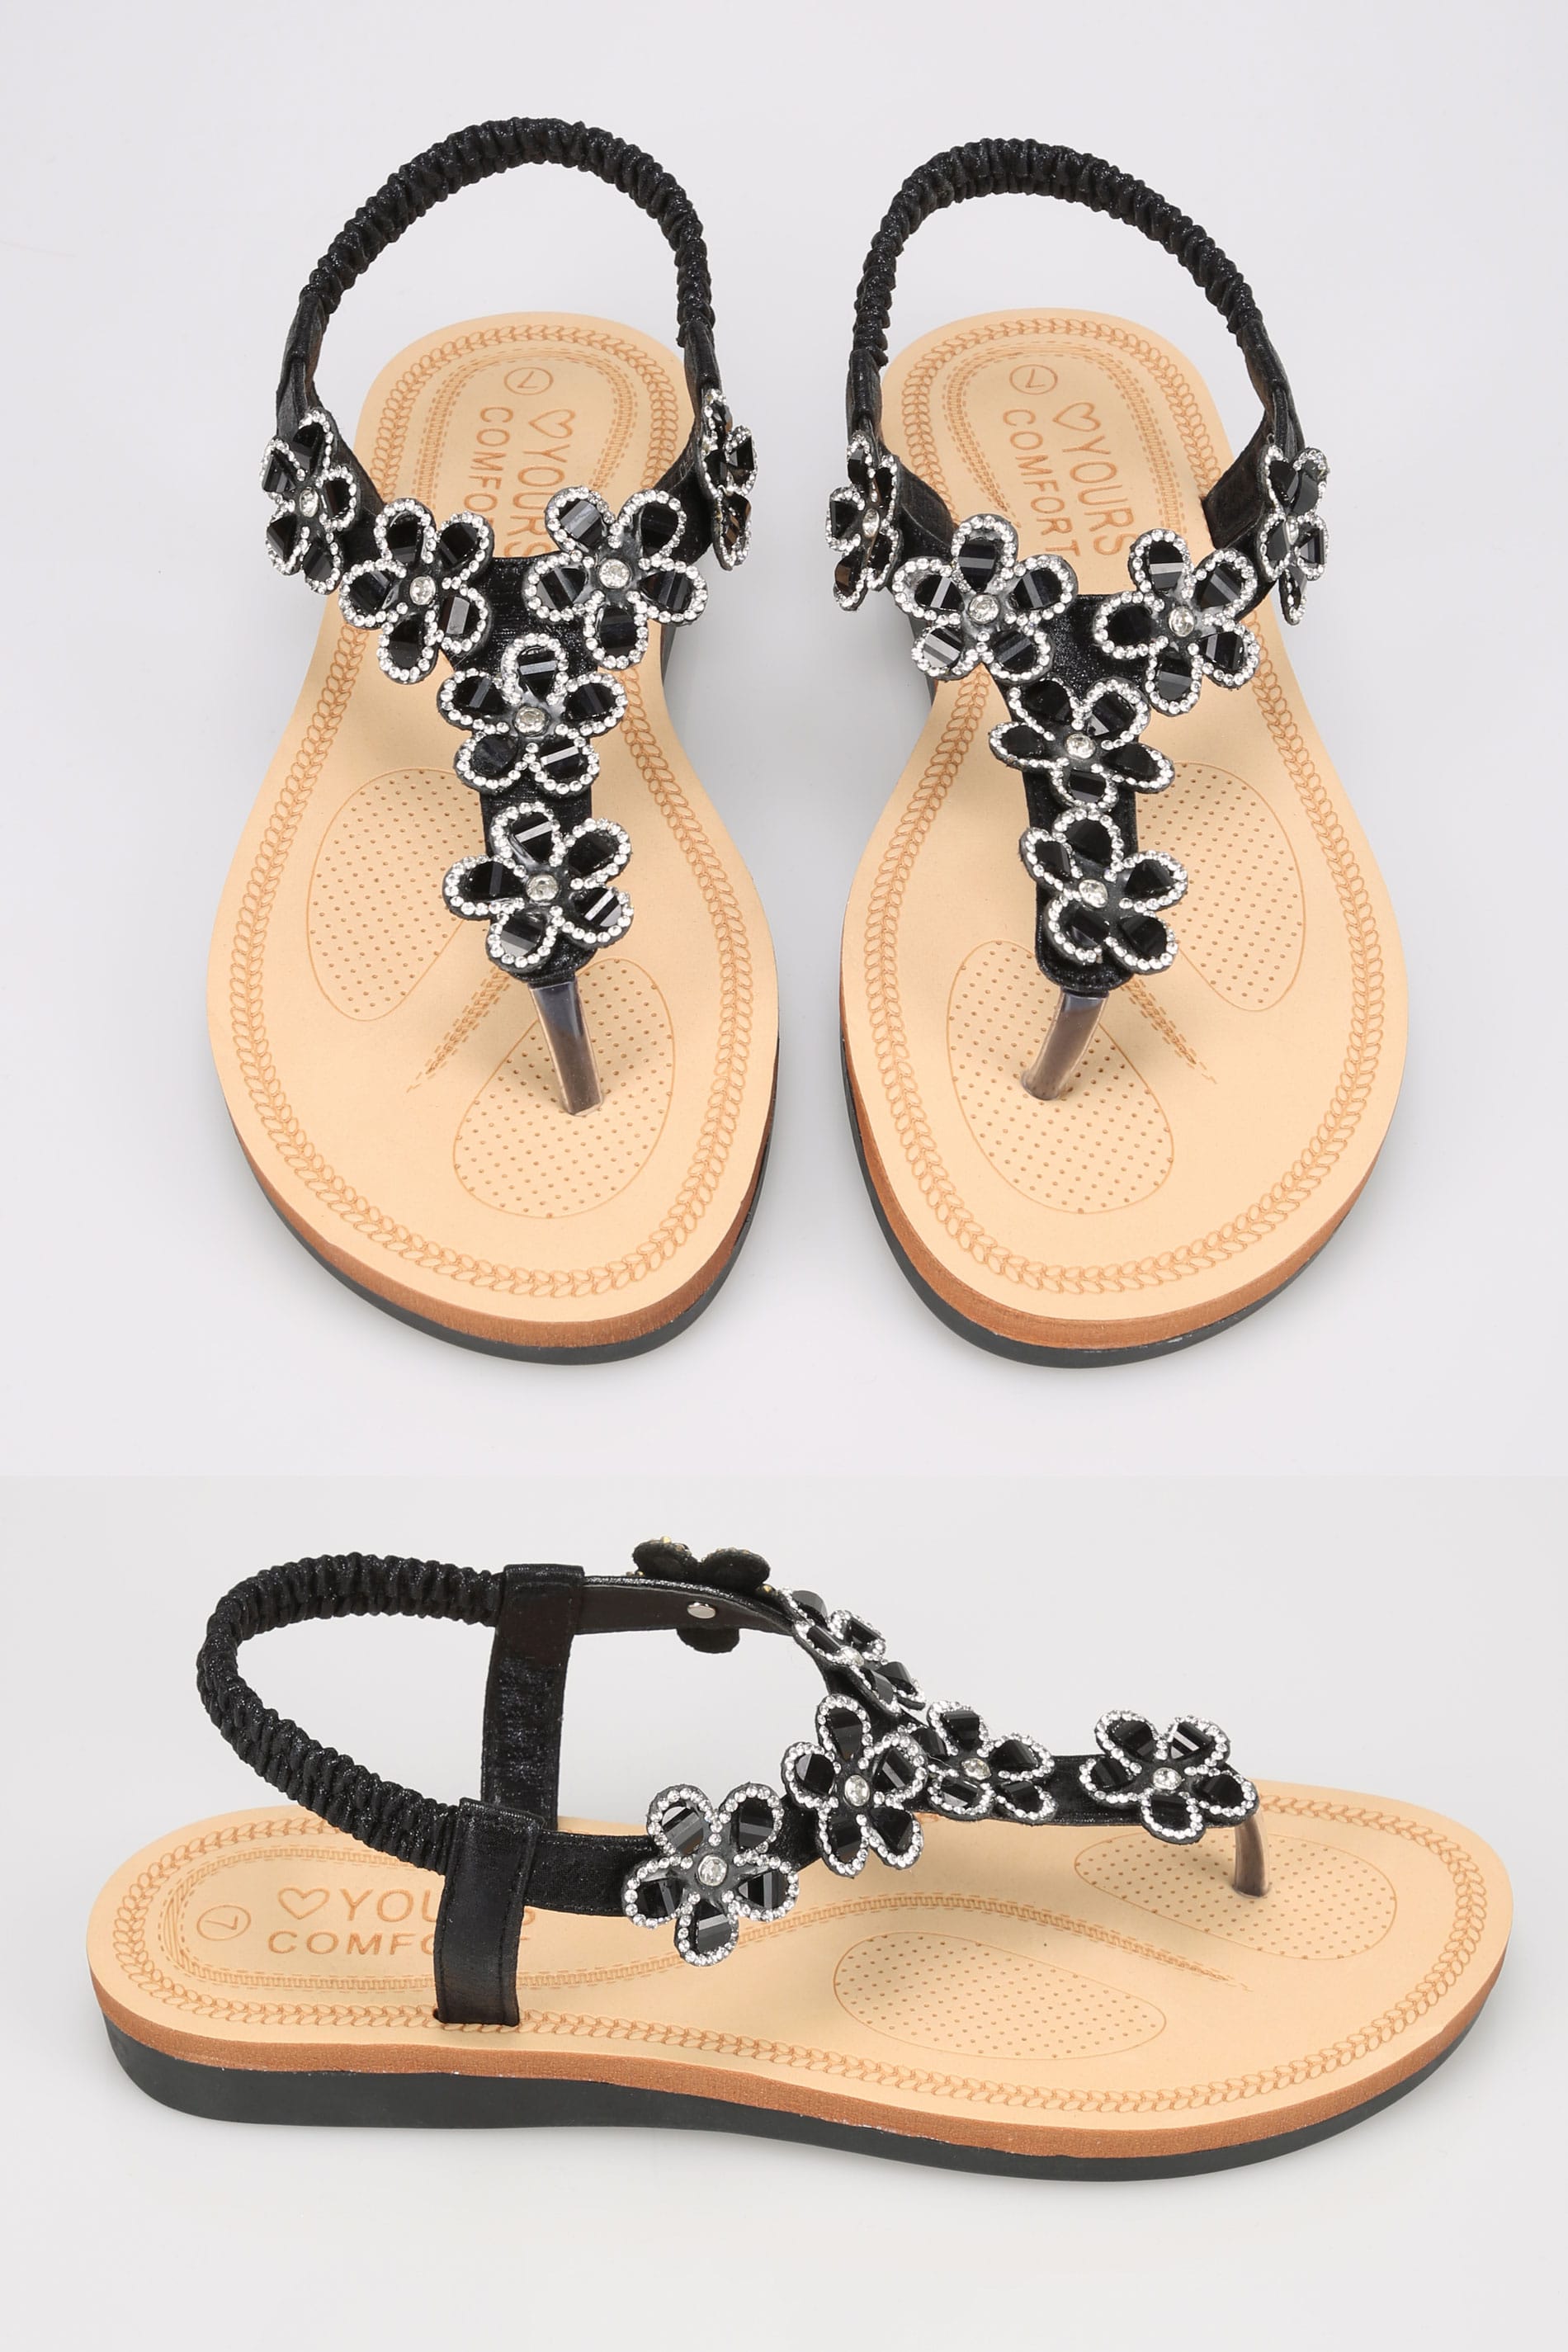 Black Open Toe Sandals With Embellished Floral Straps In TRUE EEE Fit ...